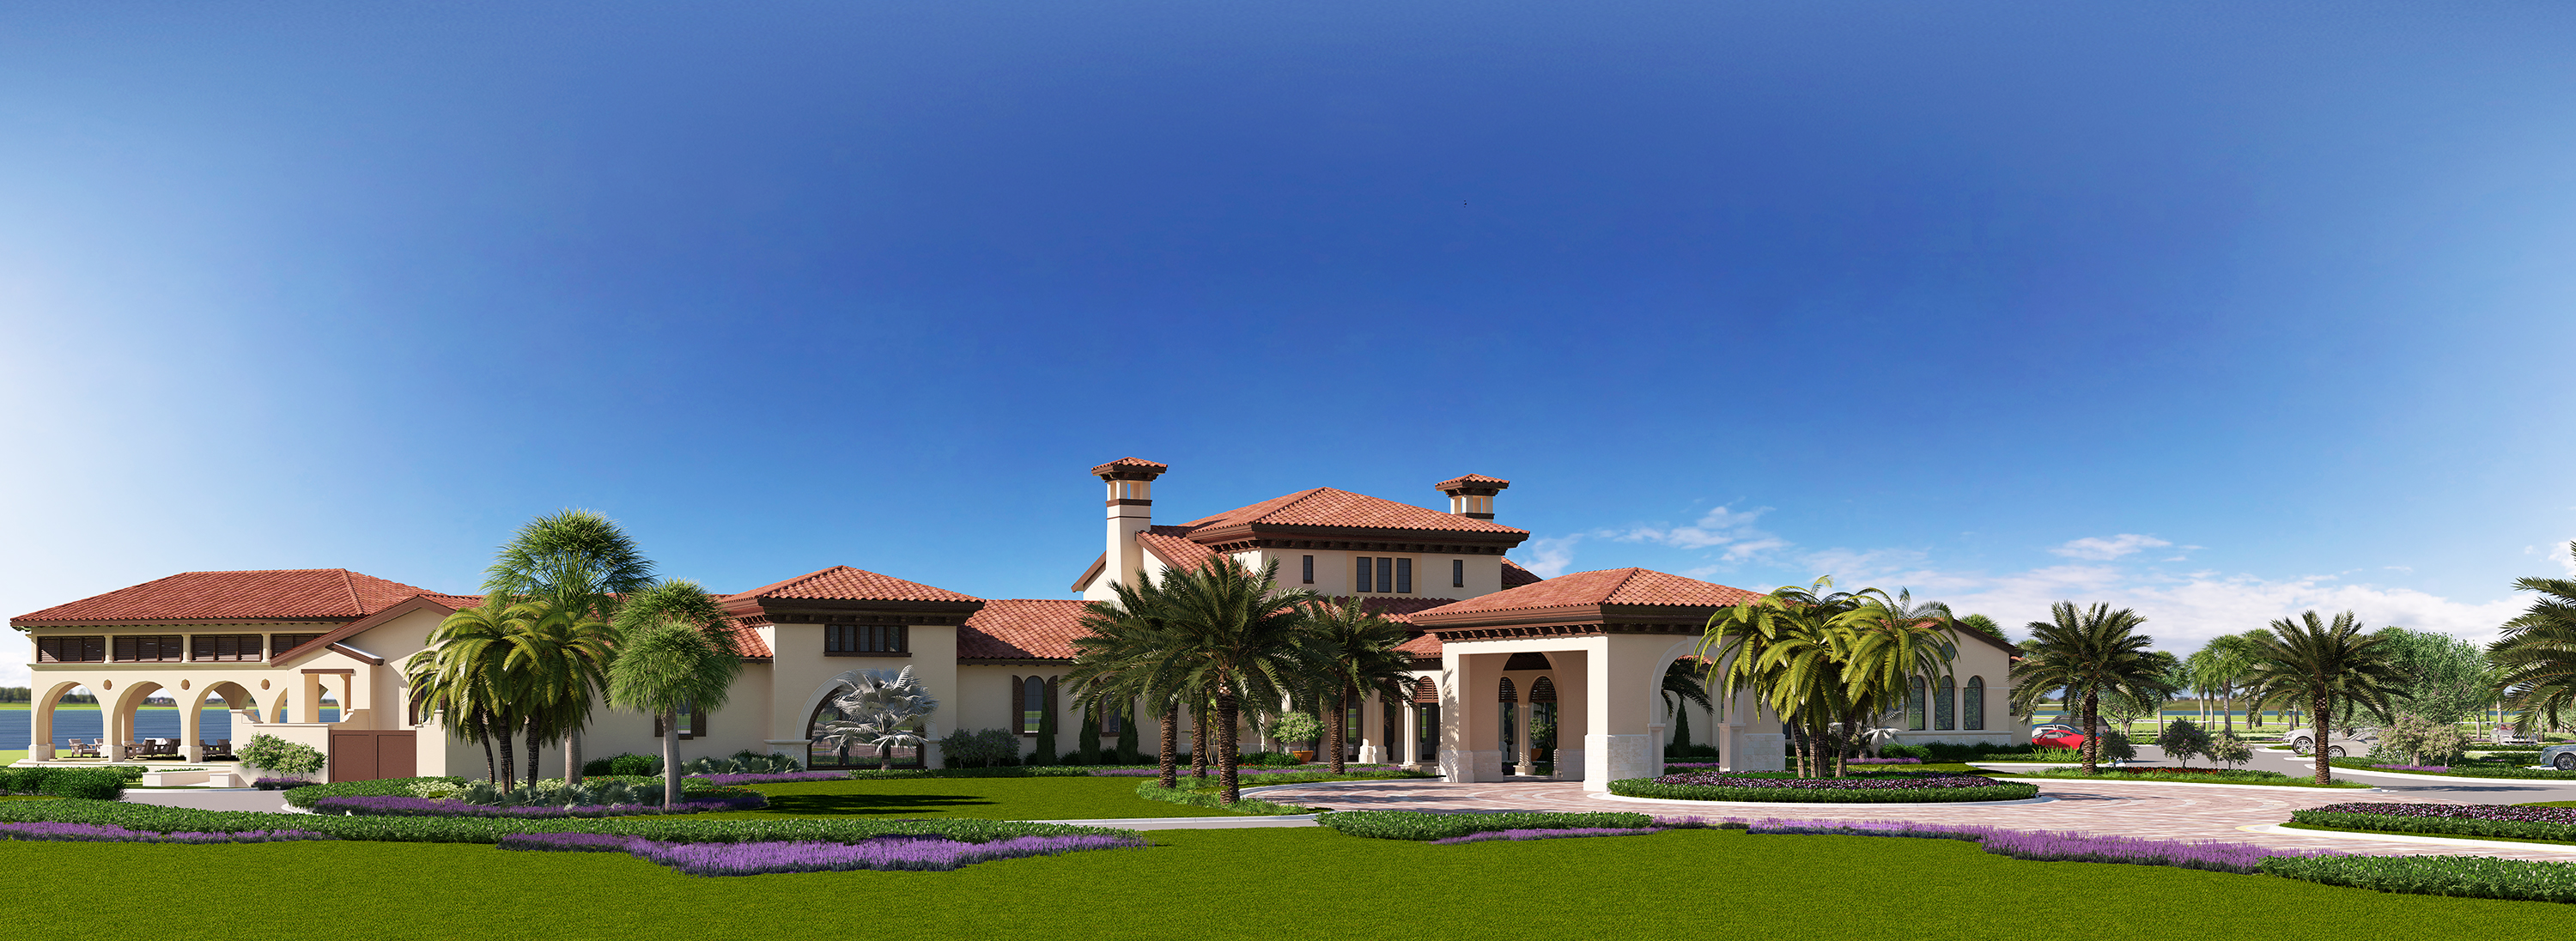 Rendering of the Parkland Bay clubhouse